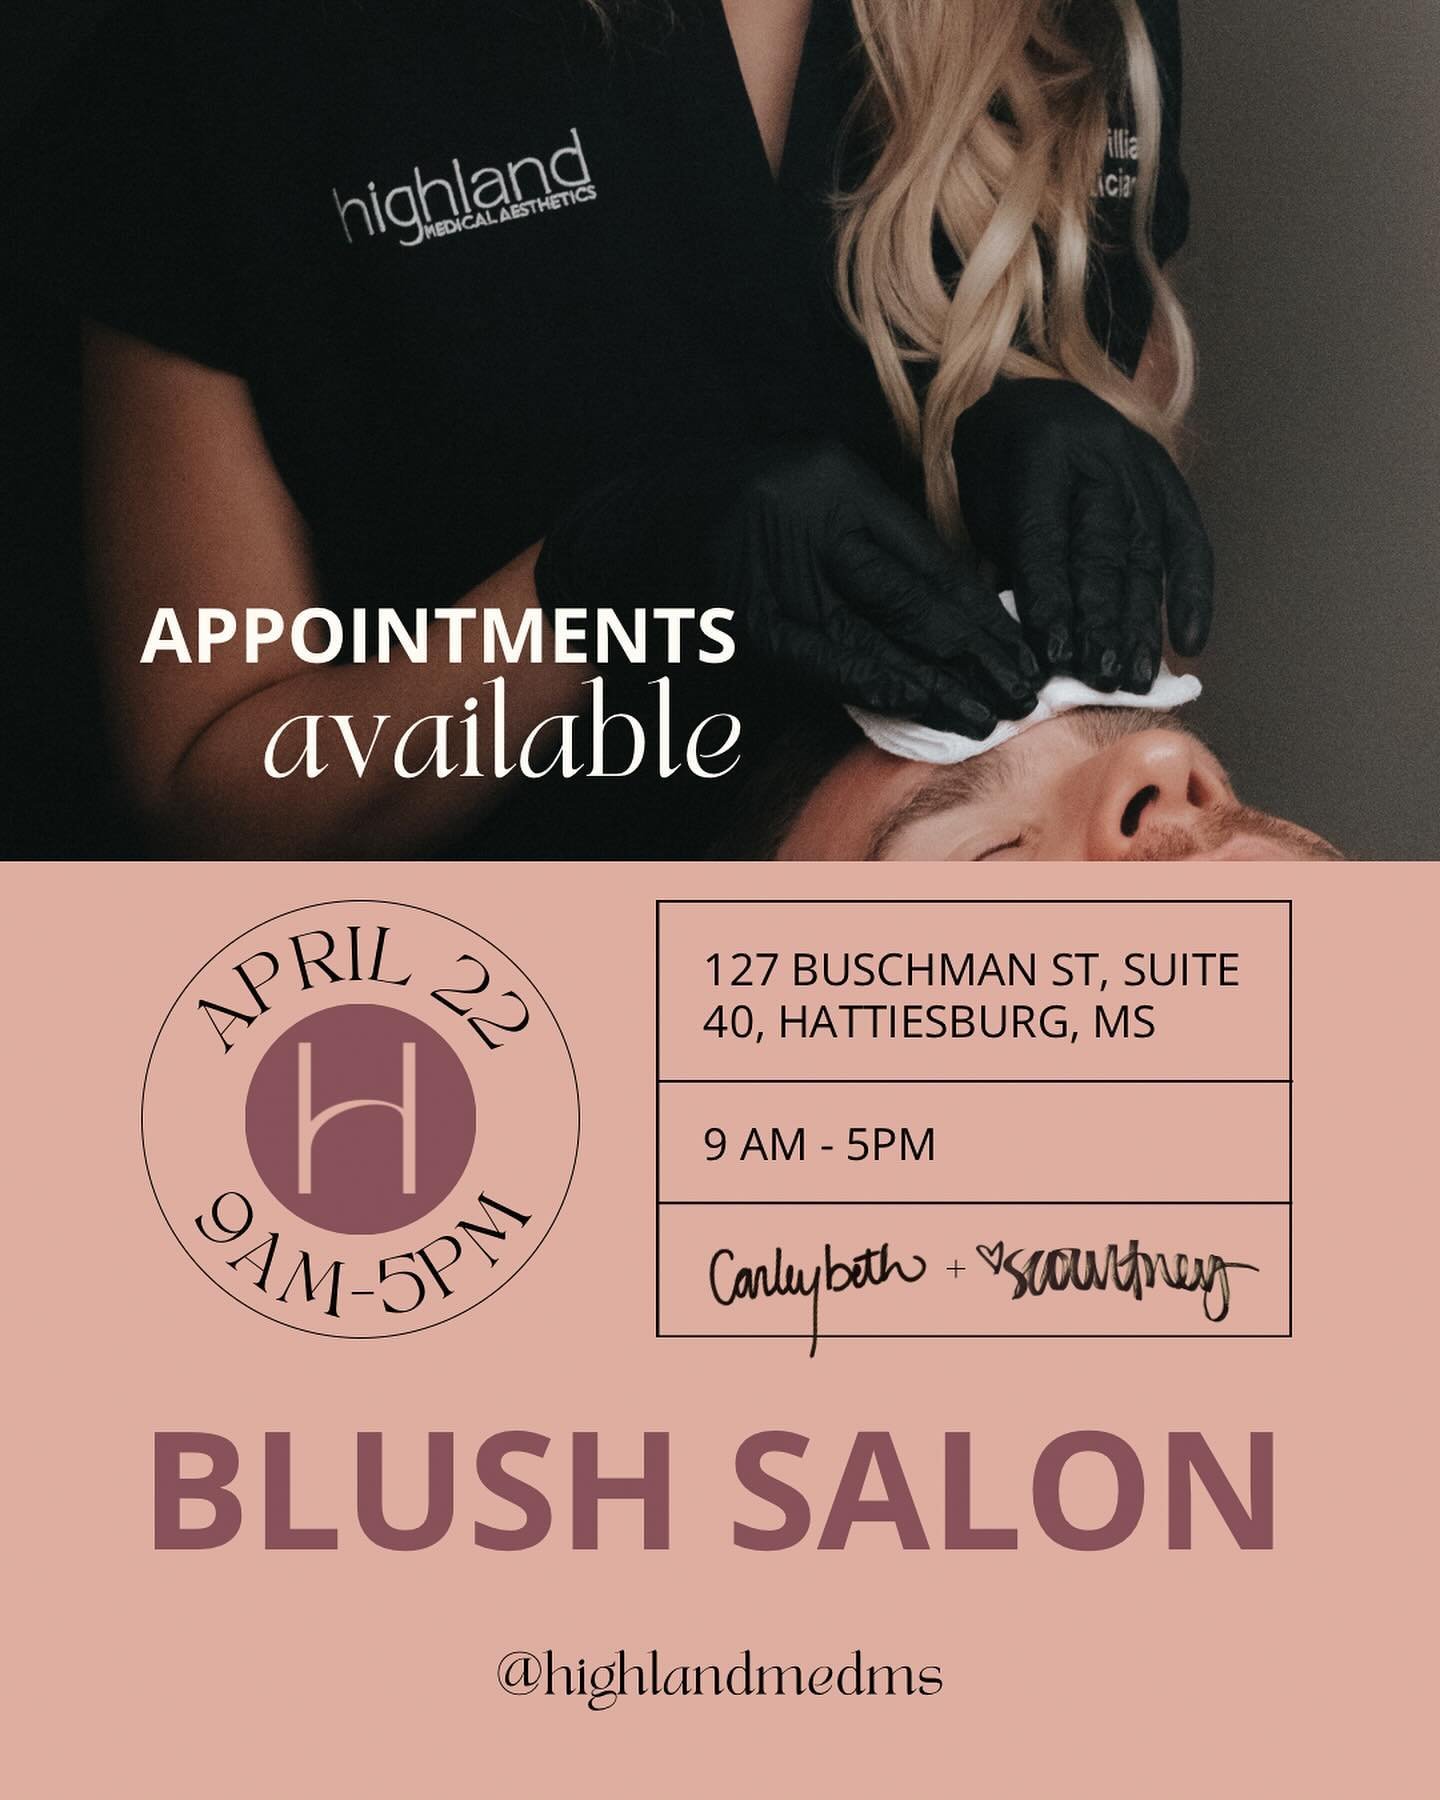 HATTIESBURG FRIENDS, this one is for YOU! 👏🏼

@carleybeth.skin + @saracourtney.np are coming to @blushsalondowntown in Hattiesburg, on April 22, from 9 AM to 5 PM!

➡️ Swipe for EXCLUSIVE offers only available on April 22
(and then RUN to book your